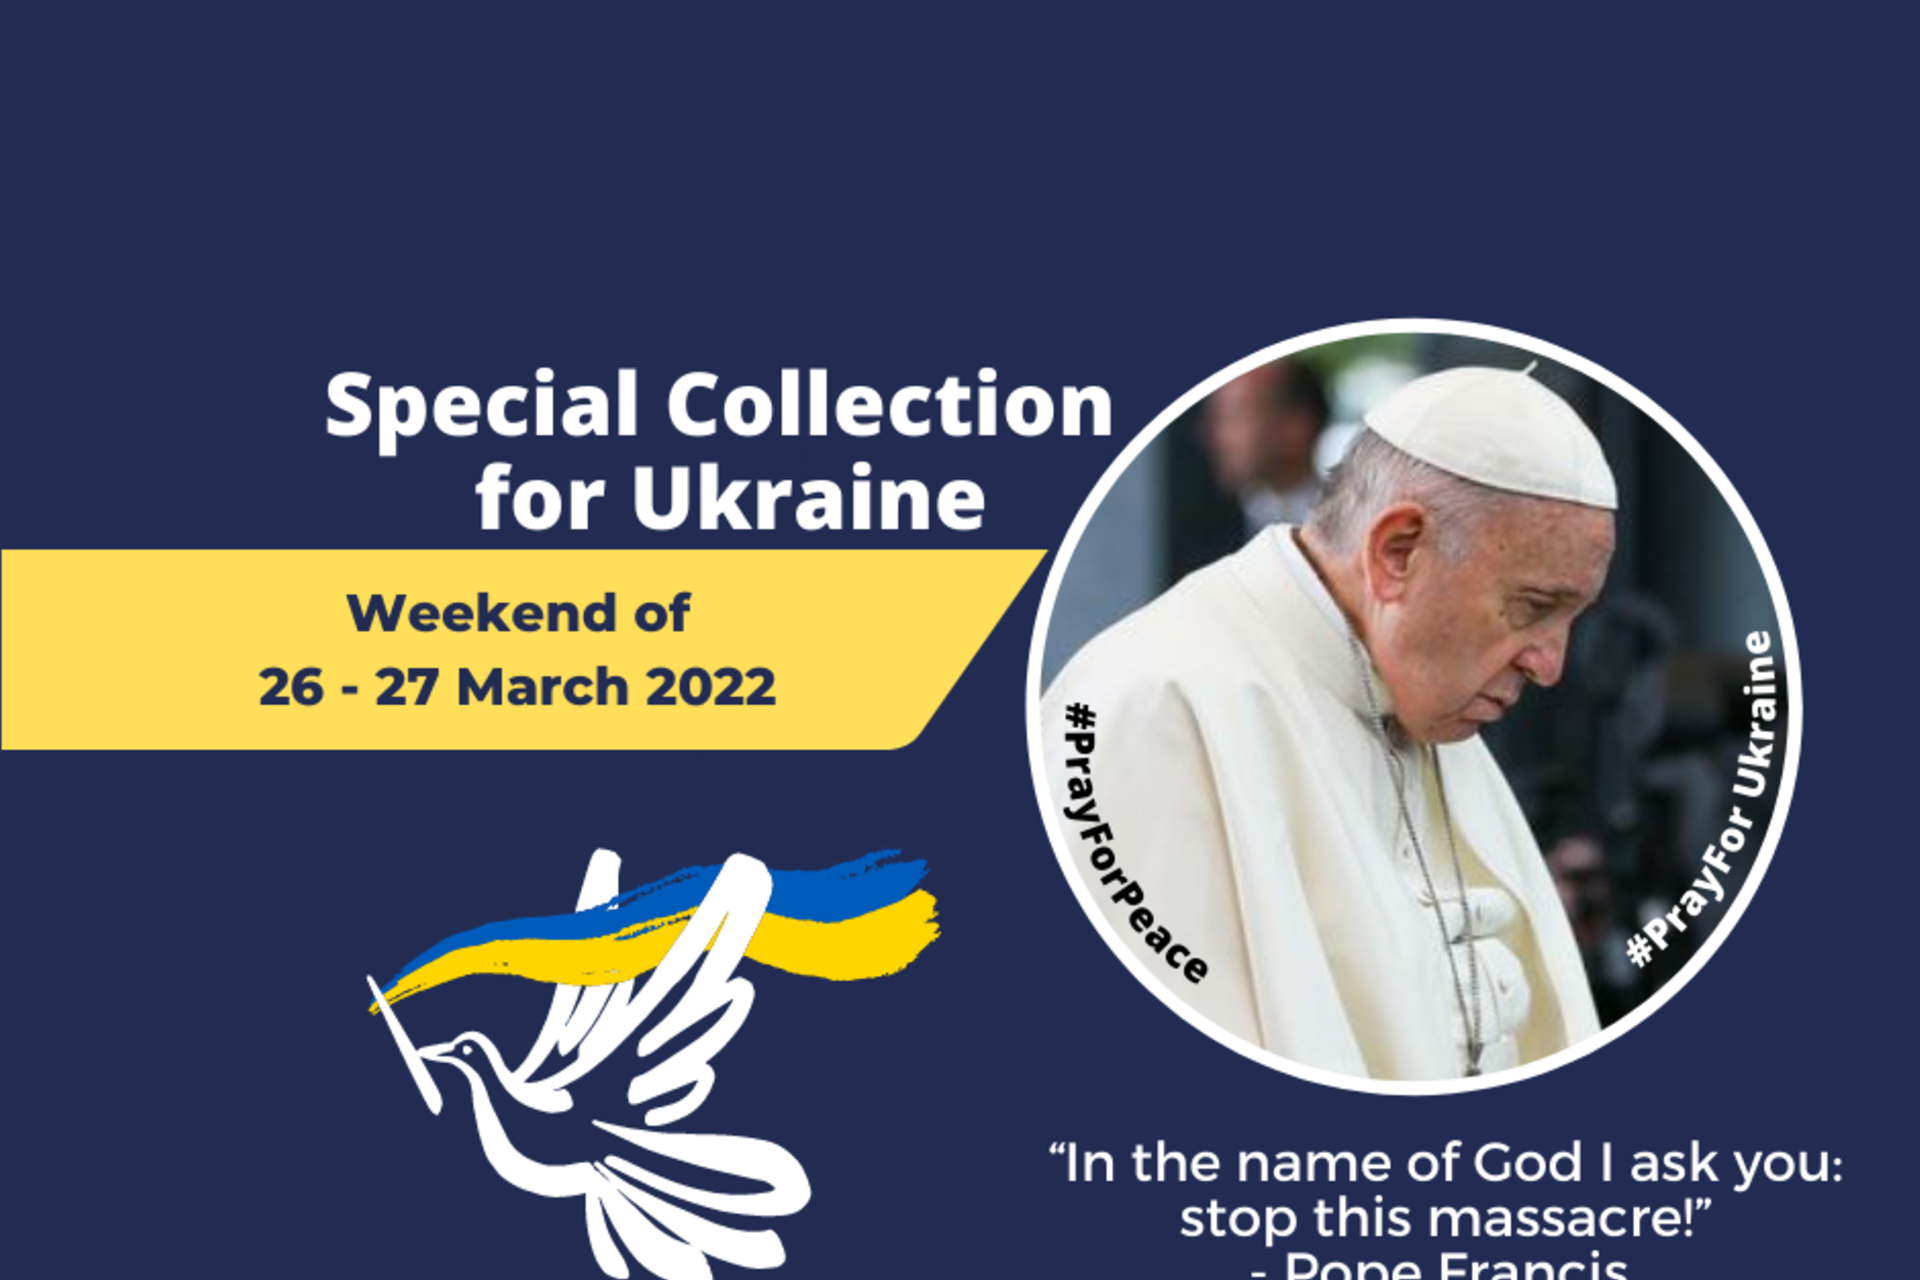 Special Collection for Ukraine on weekend of 26 – 27 March 2022